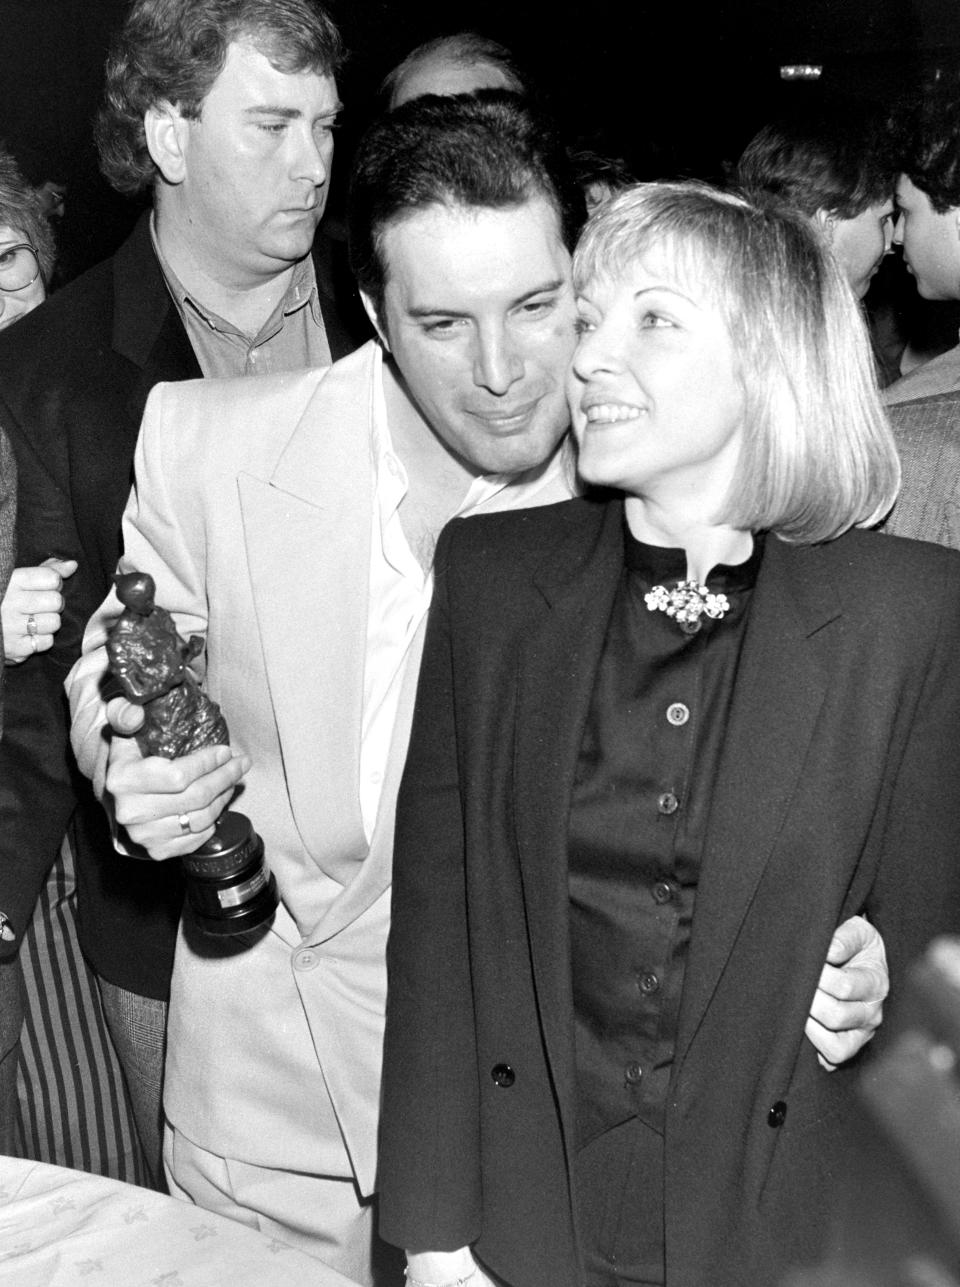 Freddie Mercury, with girlfriend Mary Austin, at the Ivor Novello Awards in May 1987 where Queen won the award for Outstanding Contribution to British Music (Photo by Dave Hogan/Hulton Archive/Getty Images)